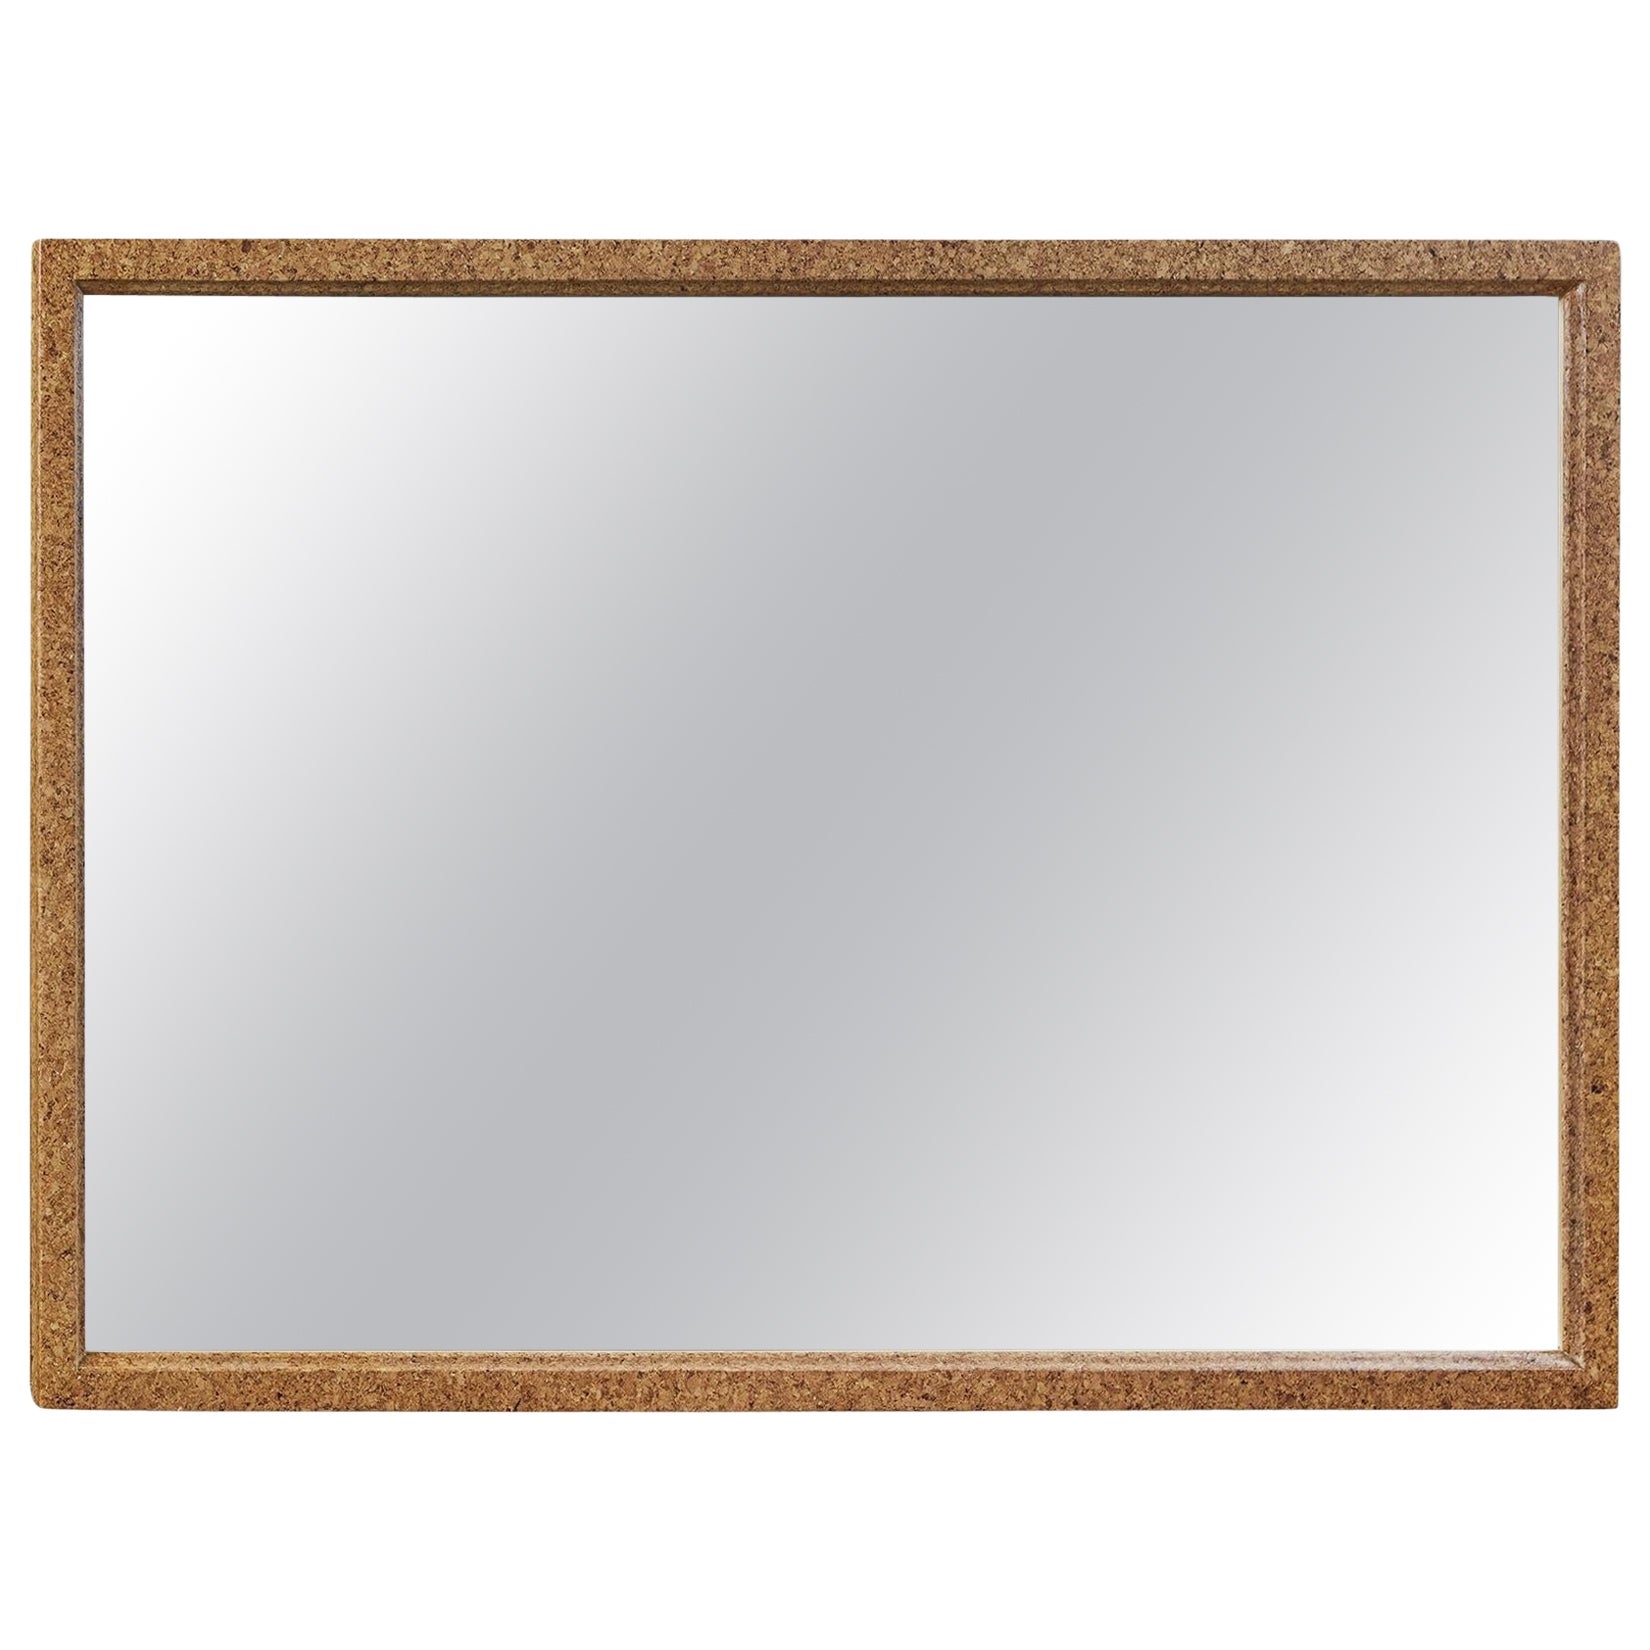 Paul Frankl Cork Wall Mirror for Johnson Furniture Co